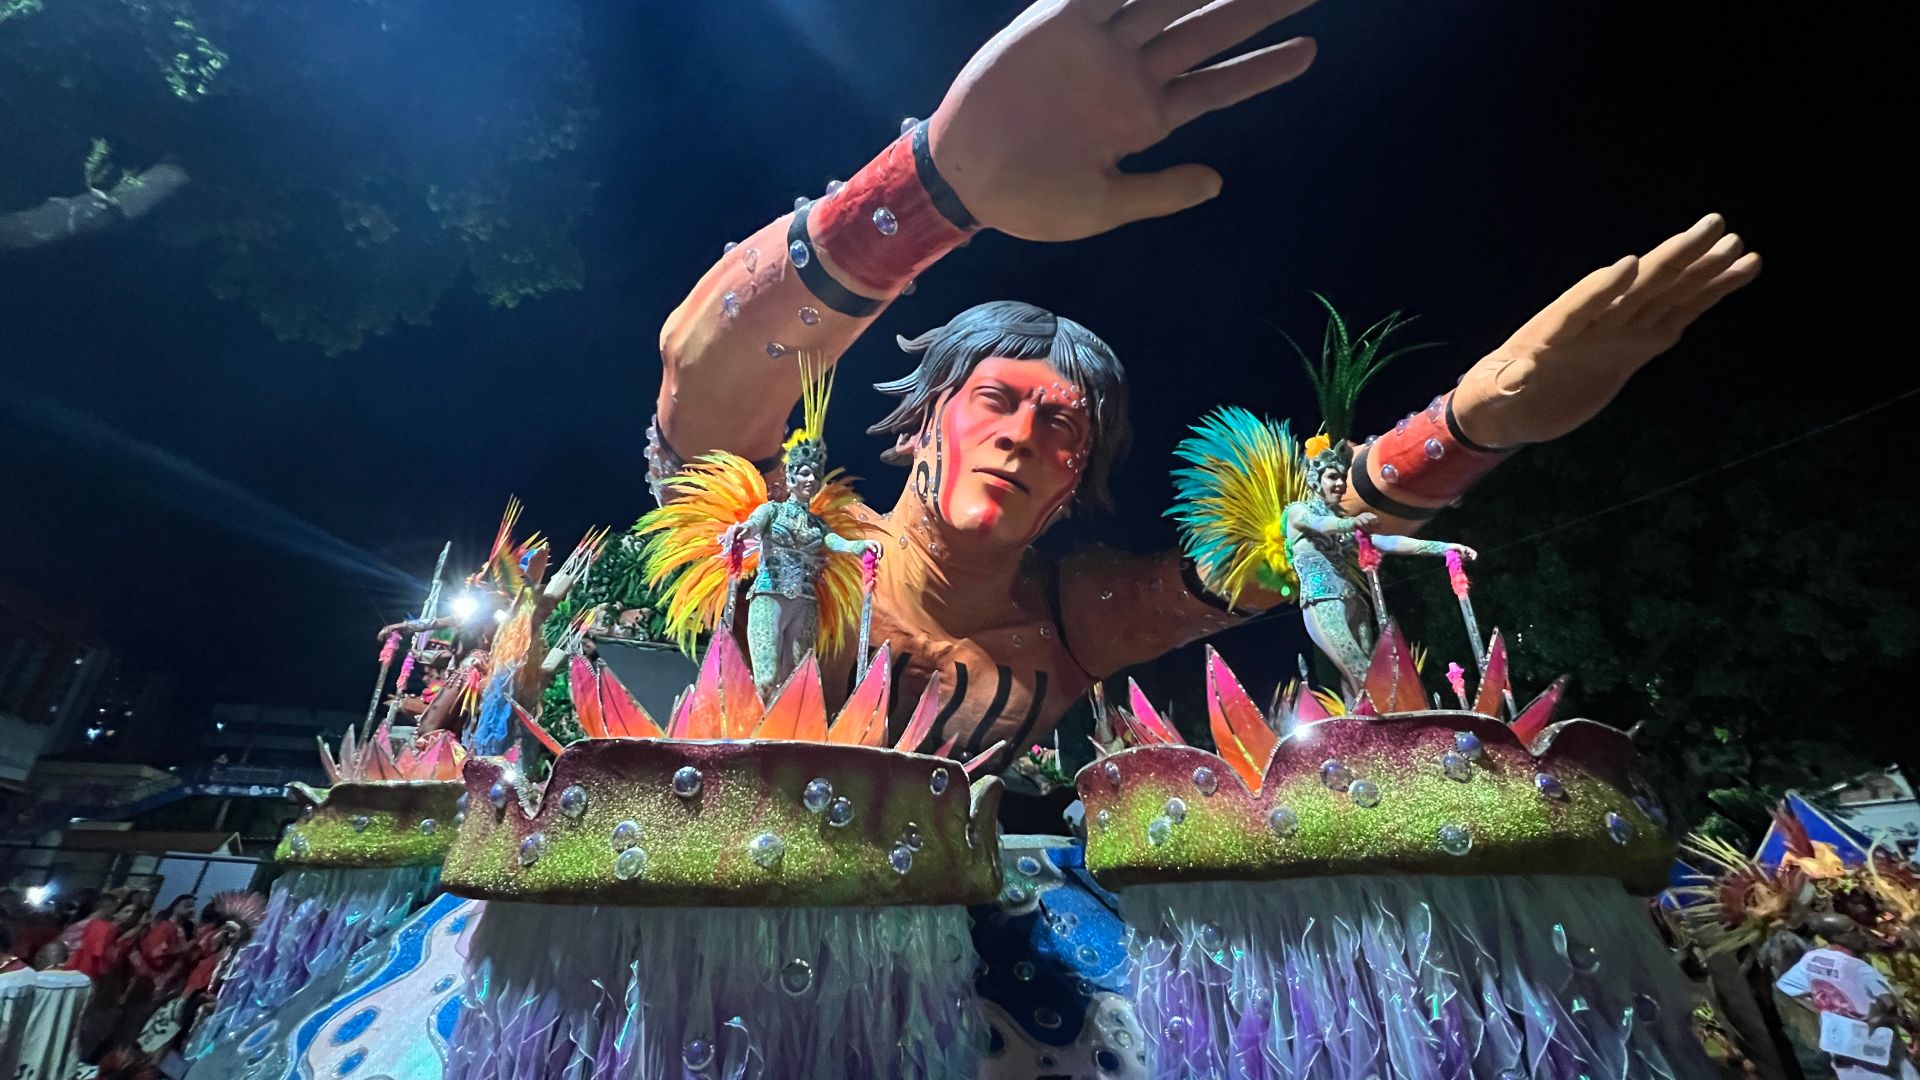 A float at the Sambadrome in Rio de Janeiro depicts a Yanomami person with his arms outstretched. On either side of him are platforms where dancers perform, dressed in blue sequins in a riot of yellow feathers emerging like wings from their backs.